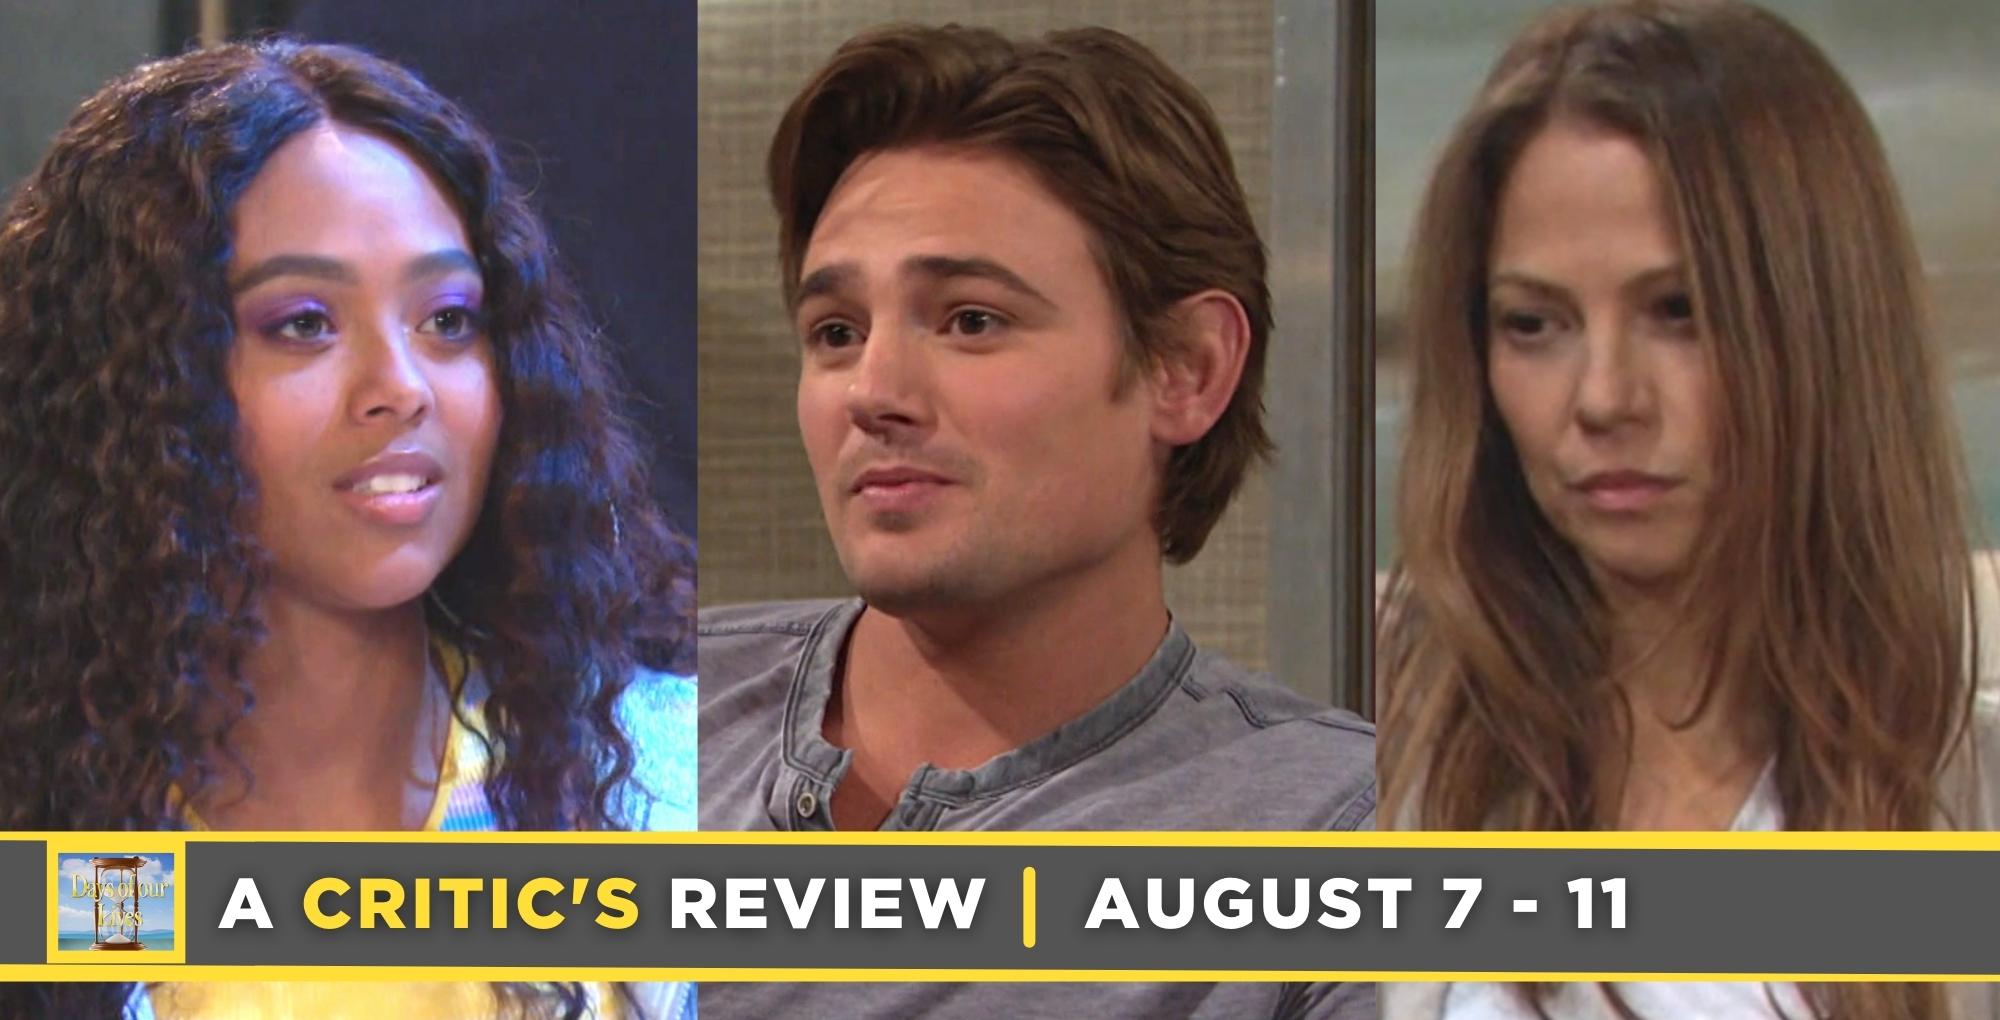 days of our lives critic's review for august 7 – august 11, 2023, three images, talia, johnny, and ava.